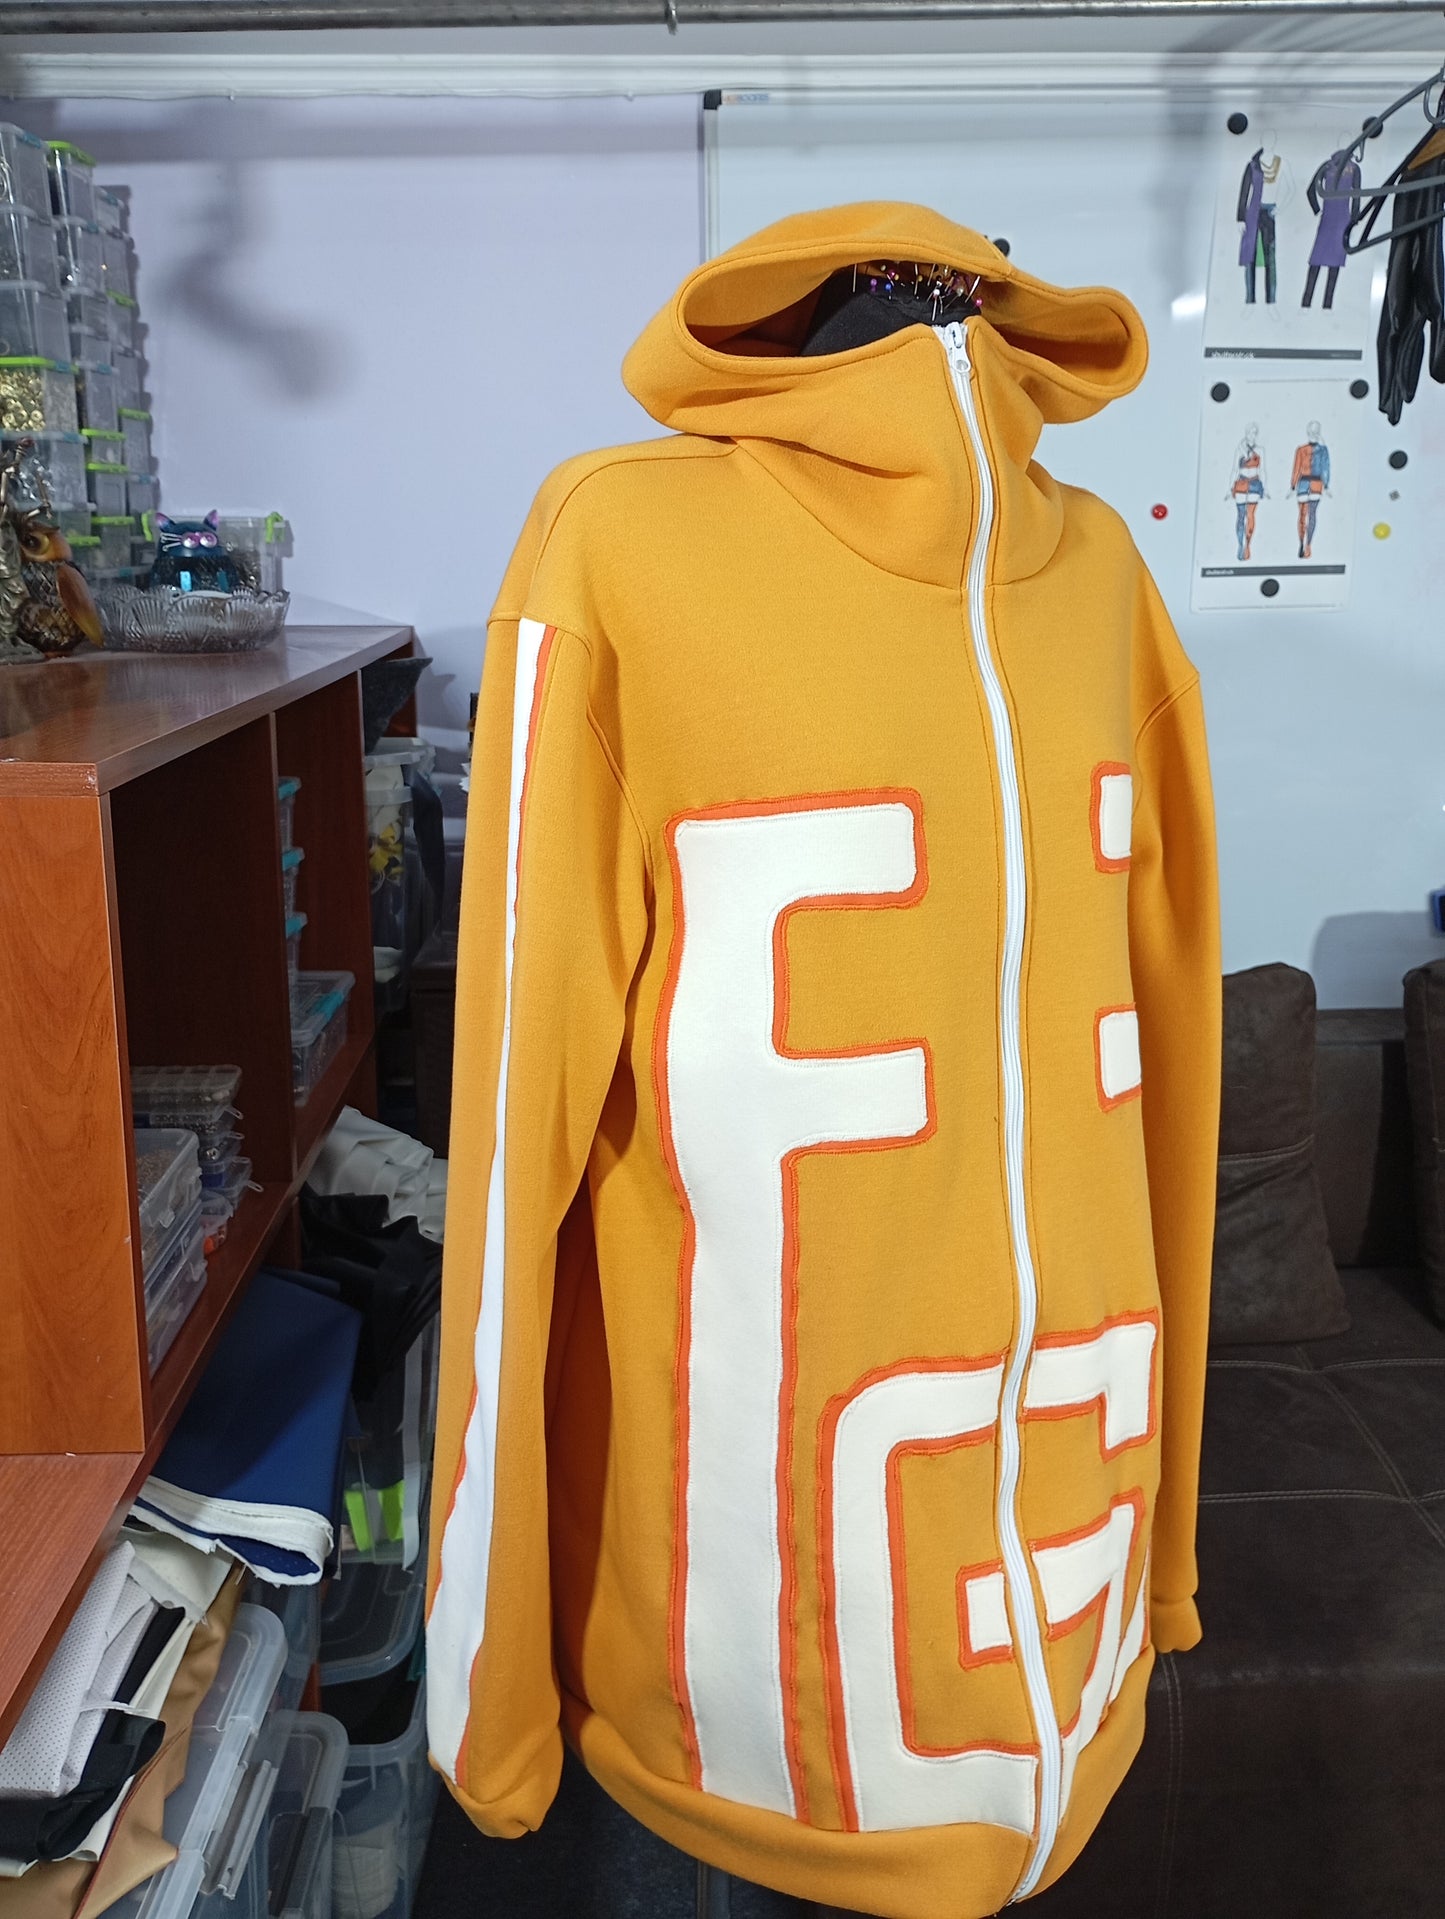 Fatgum cosplay outfit